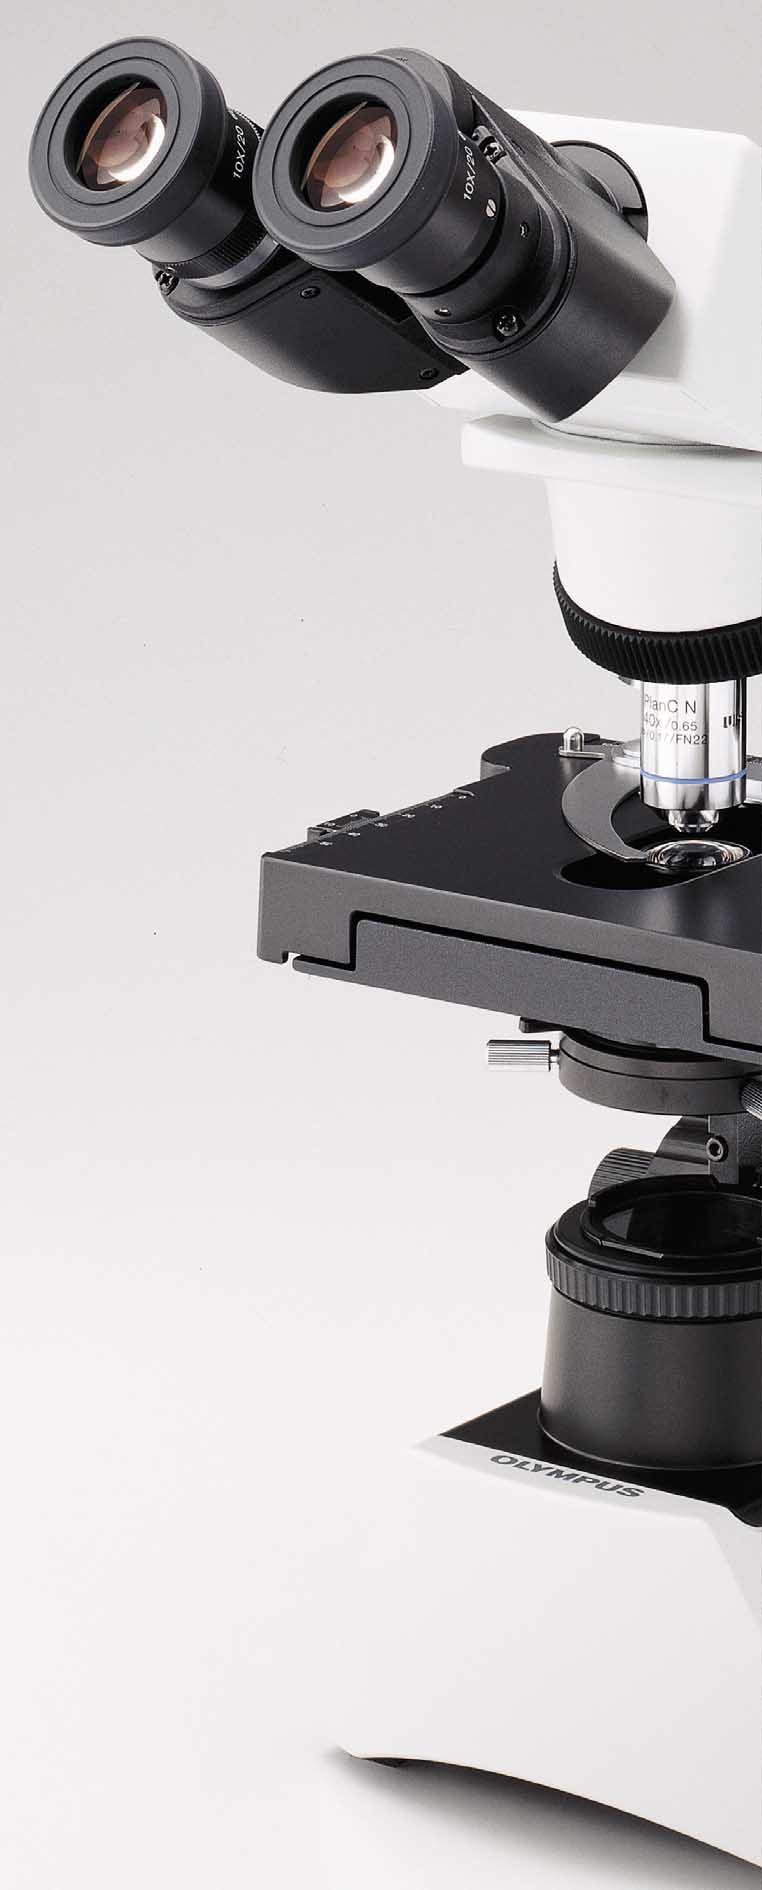 Advanced optical performance wit The Olympus CX2 microscopes, which have gained an outstanding worldwide reputation in many medical and educational arenas, now evolve with new UIS2 infinity optics.